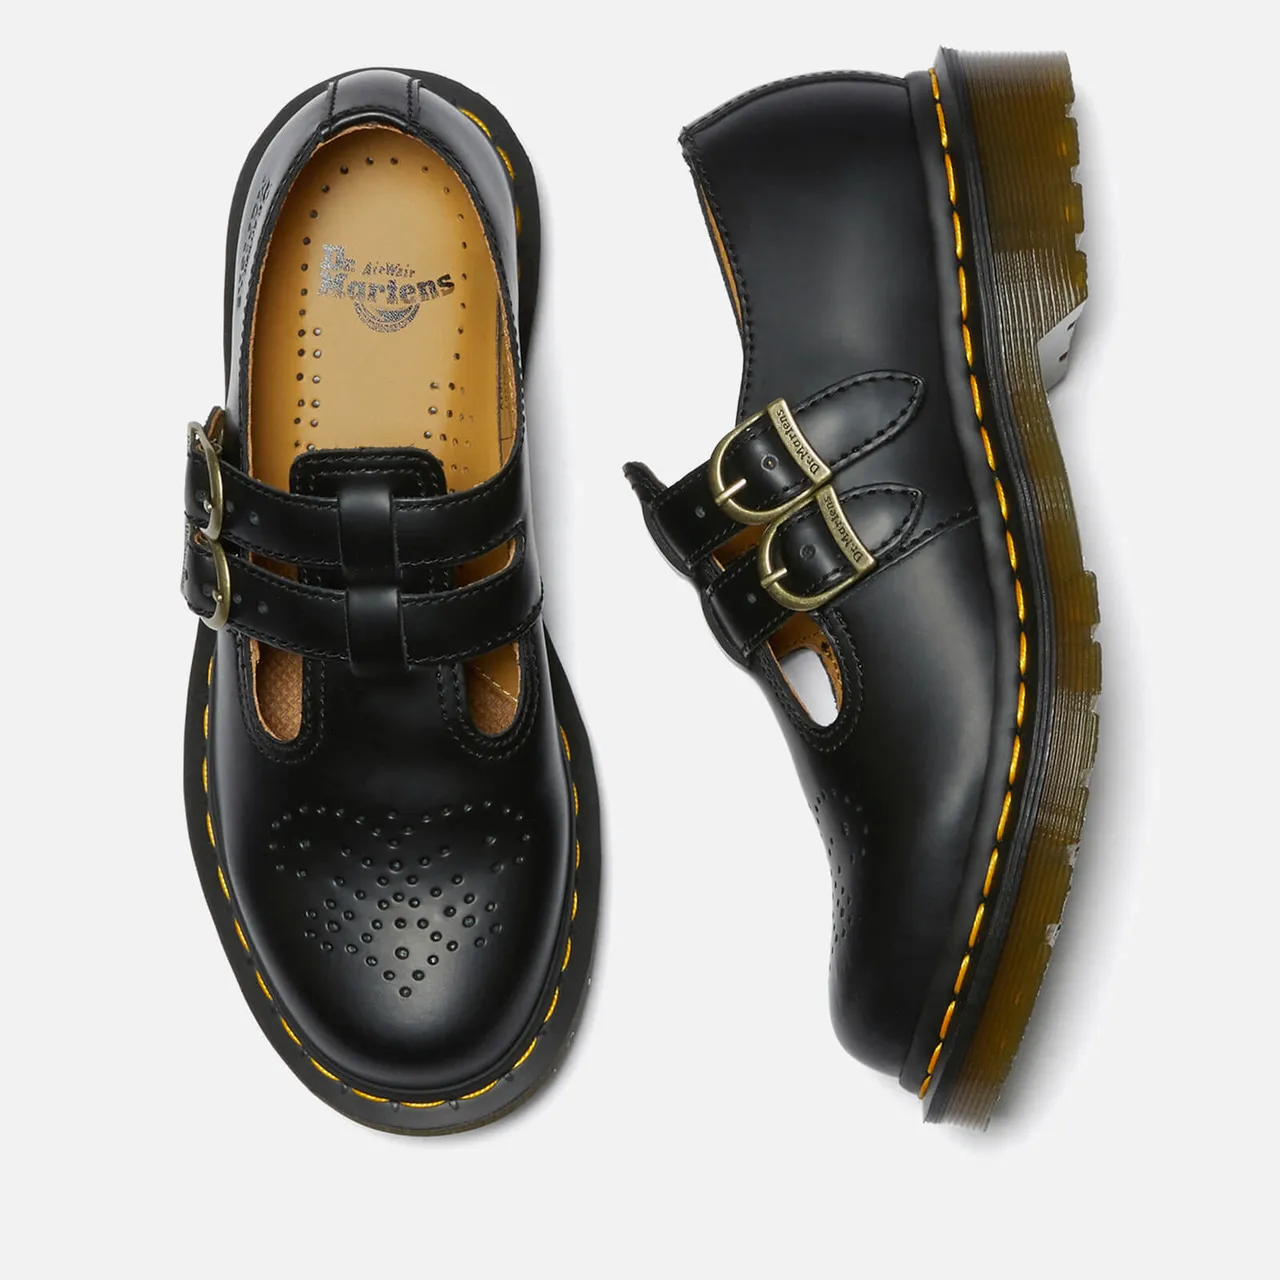 Dr. Martens Women's 8065 Leather Mary-Jane Shoes